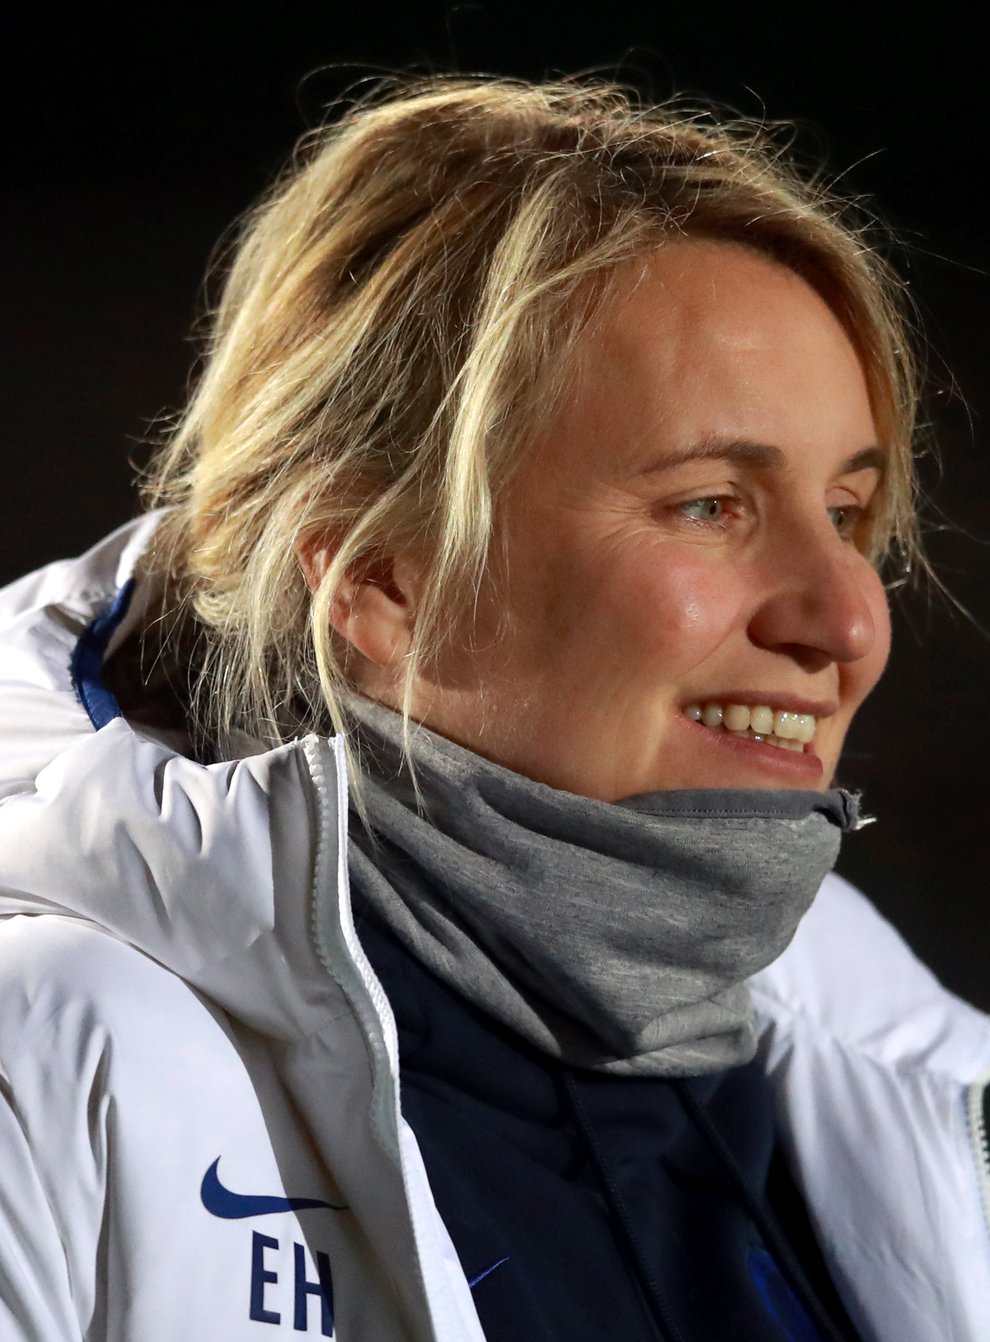 Sunday's Women's Champions League final sees Emma Hayes' Chelsea take on Barcelona